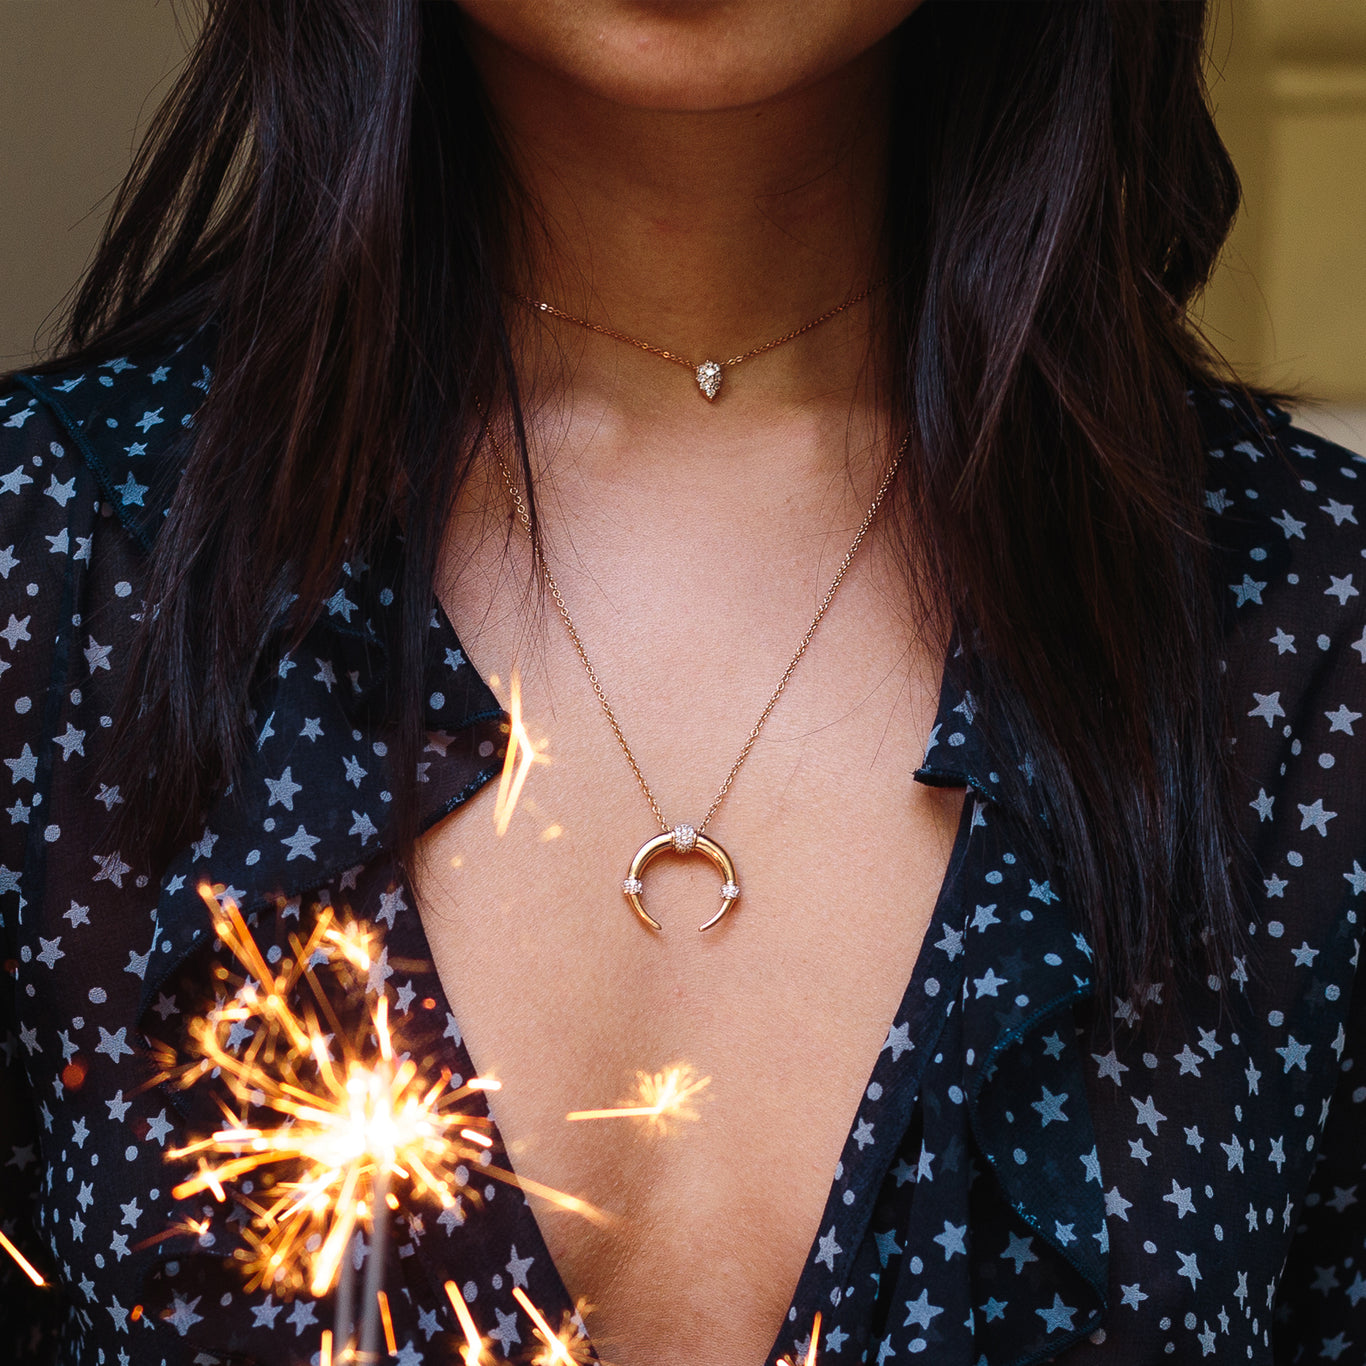 The Venus Choker Chain and Dharma Necklace shown layered together.